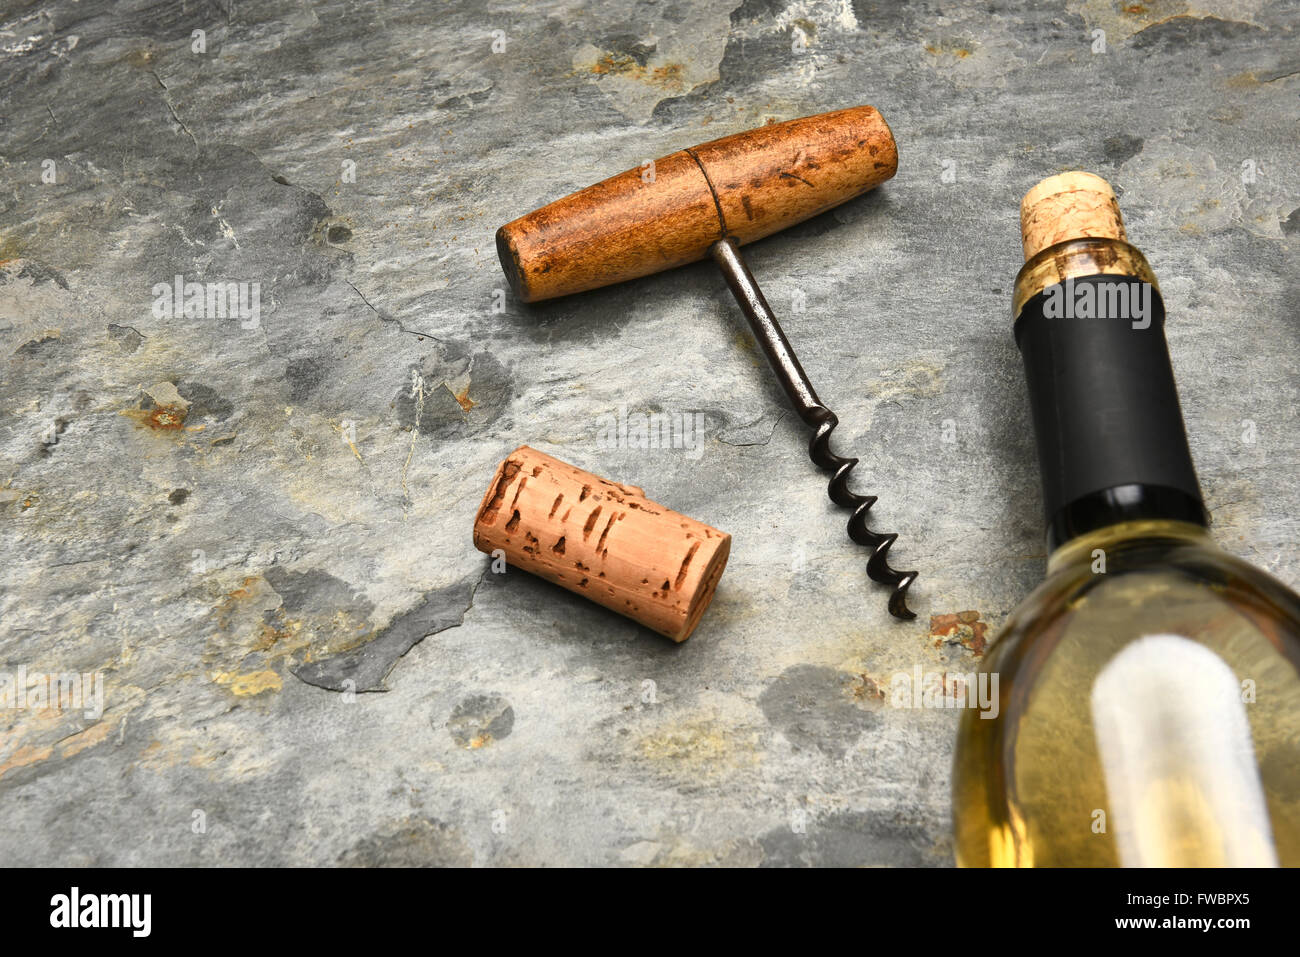 Top view of a wine bottle and cork screw on a slate surface. Stock Photo